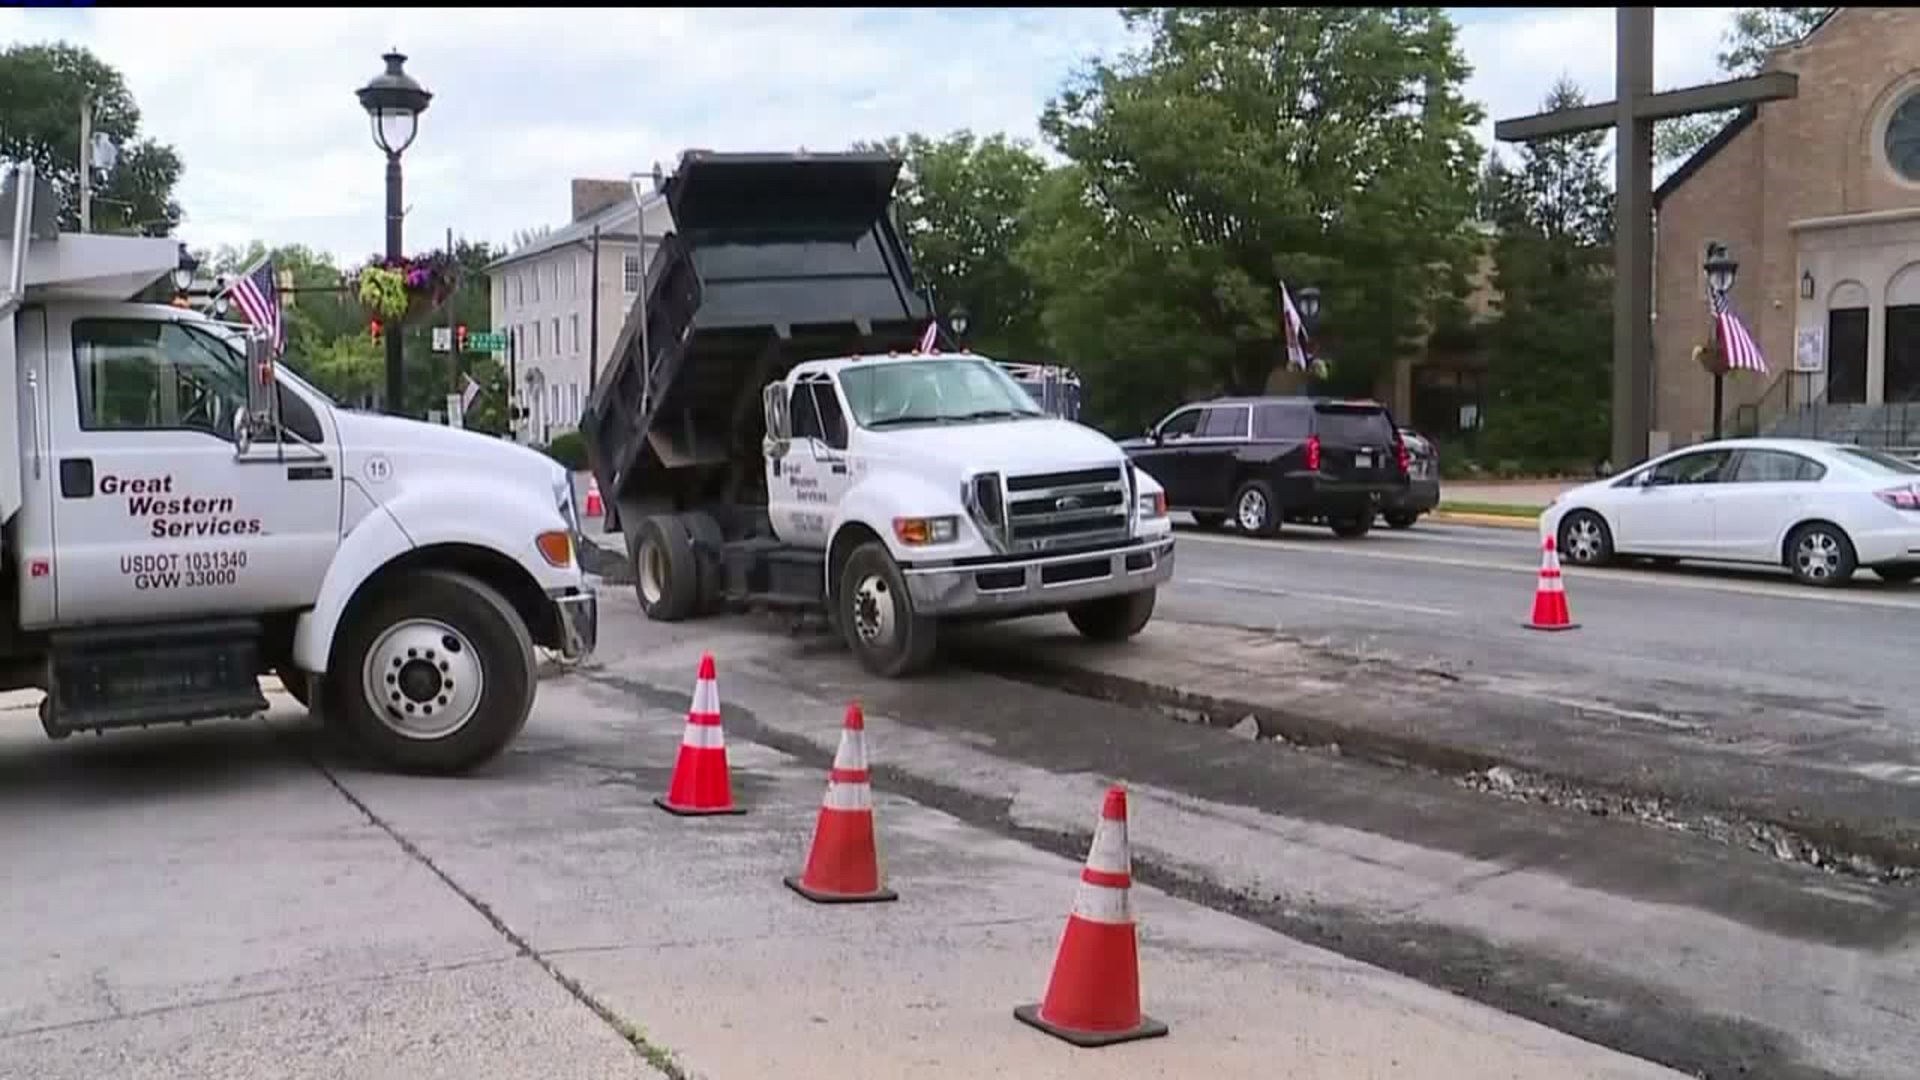 Paving Project in Stroudsburg Slows Traffic